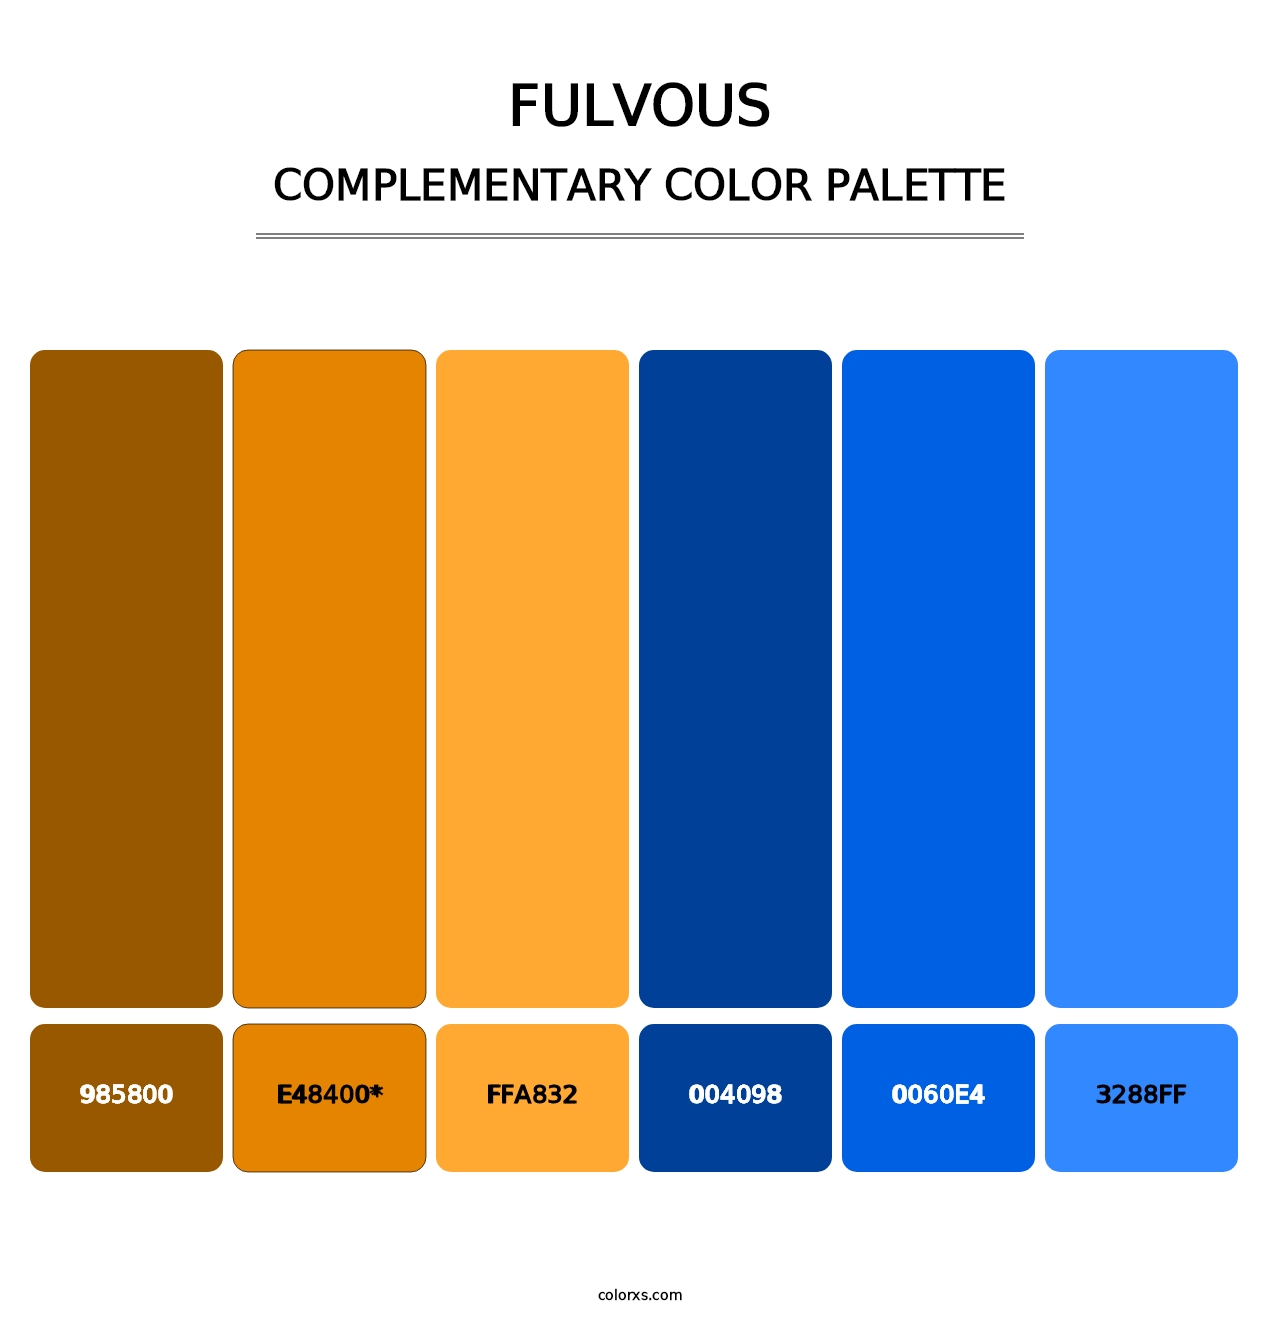 Fulvous - Complementary Color Palette